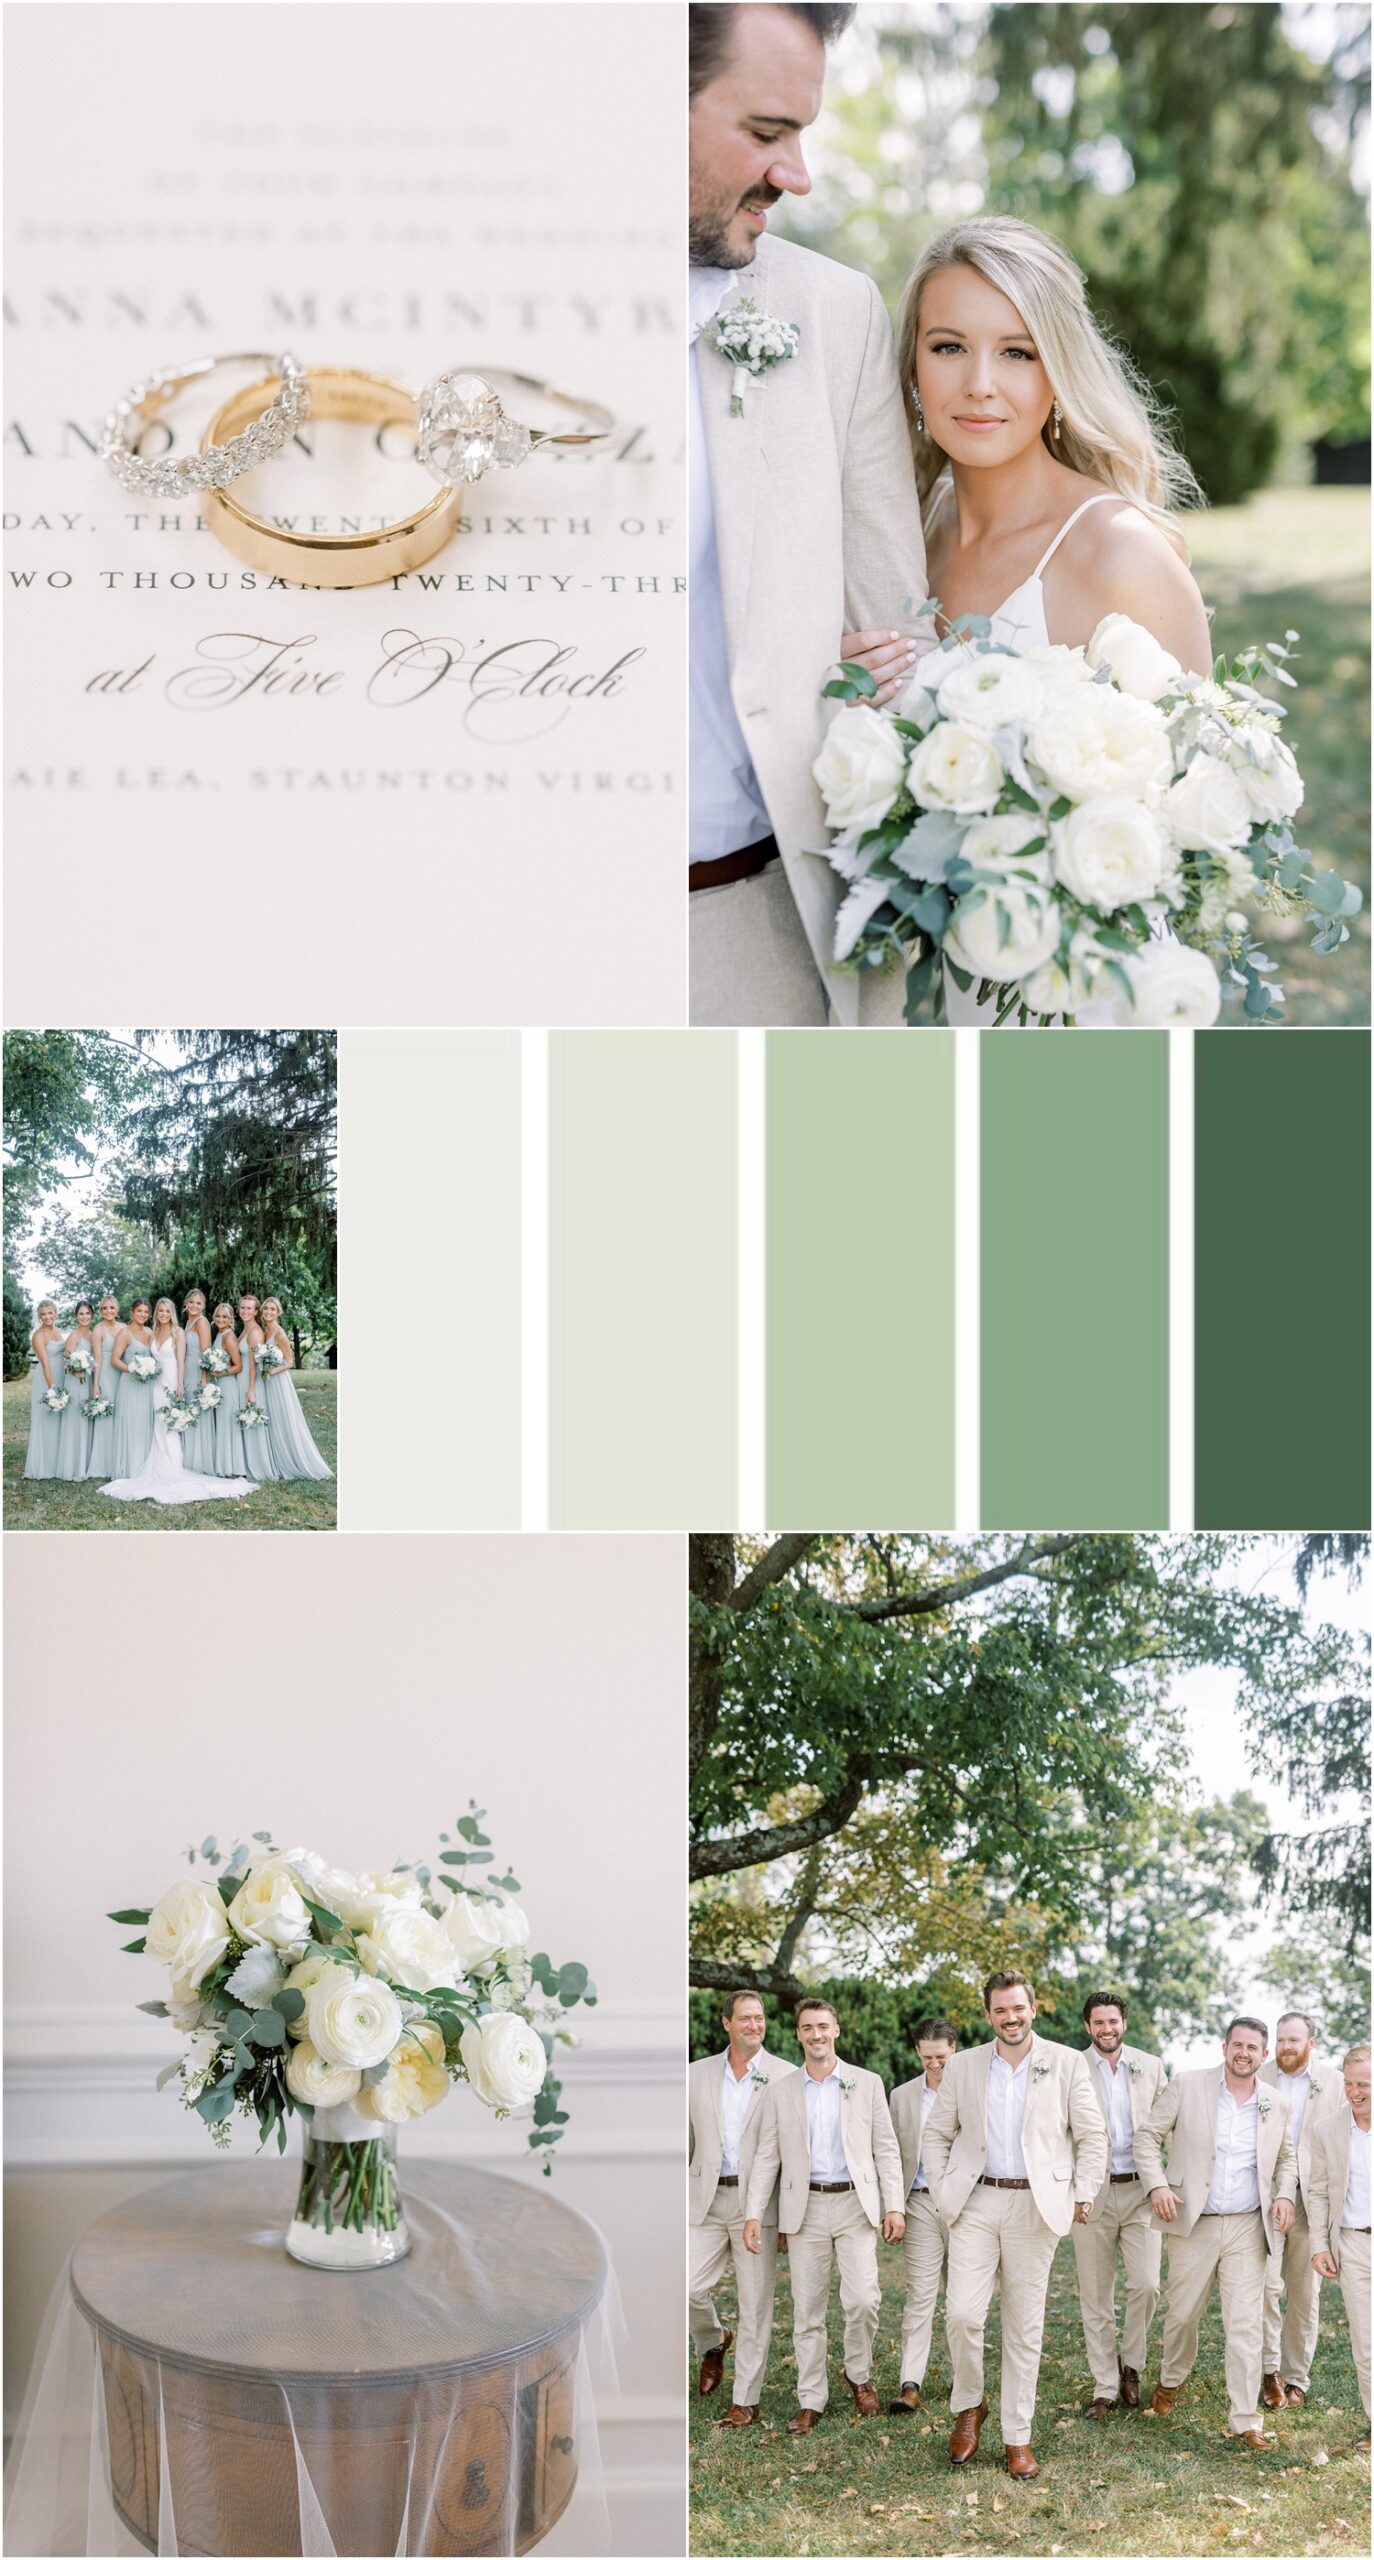 Stunning Color Palettes for Weddings | Charlottesville Photographer